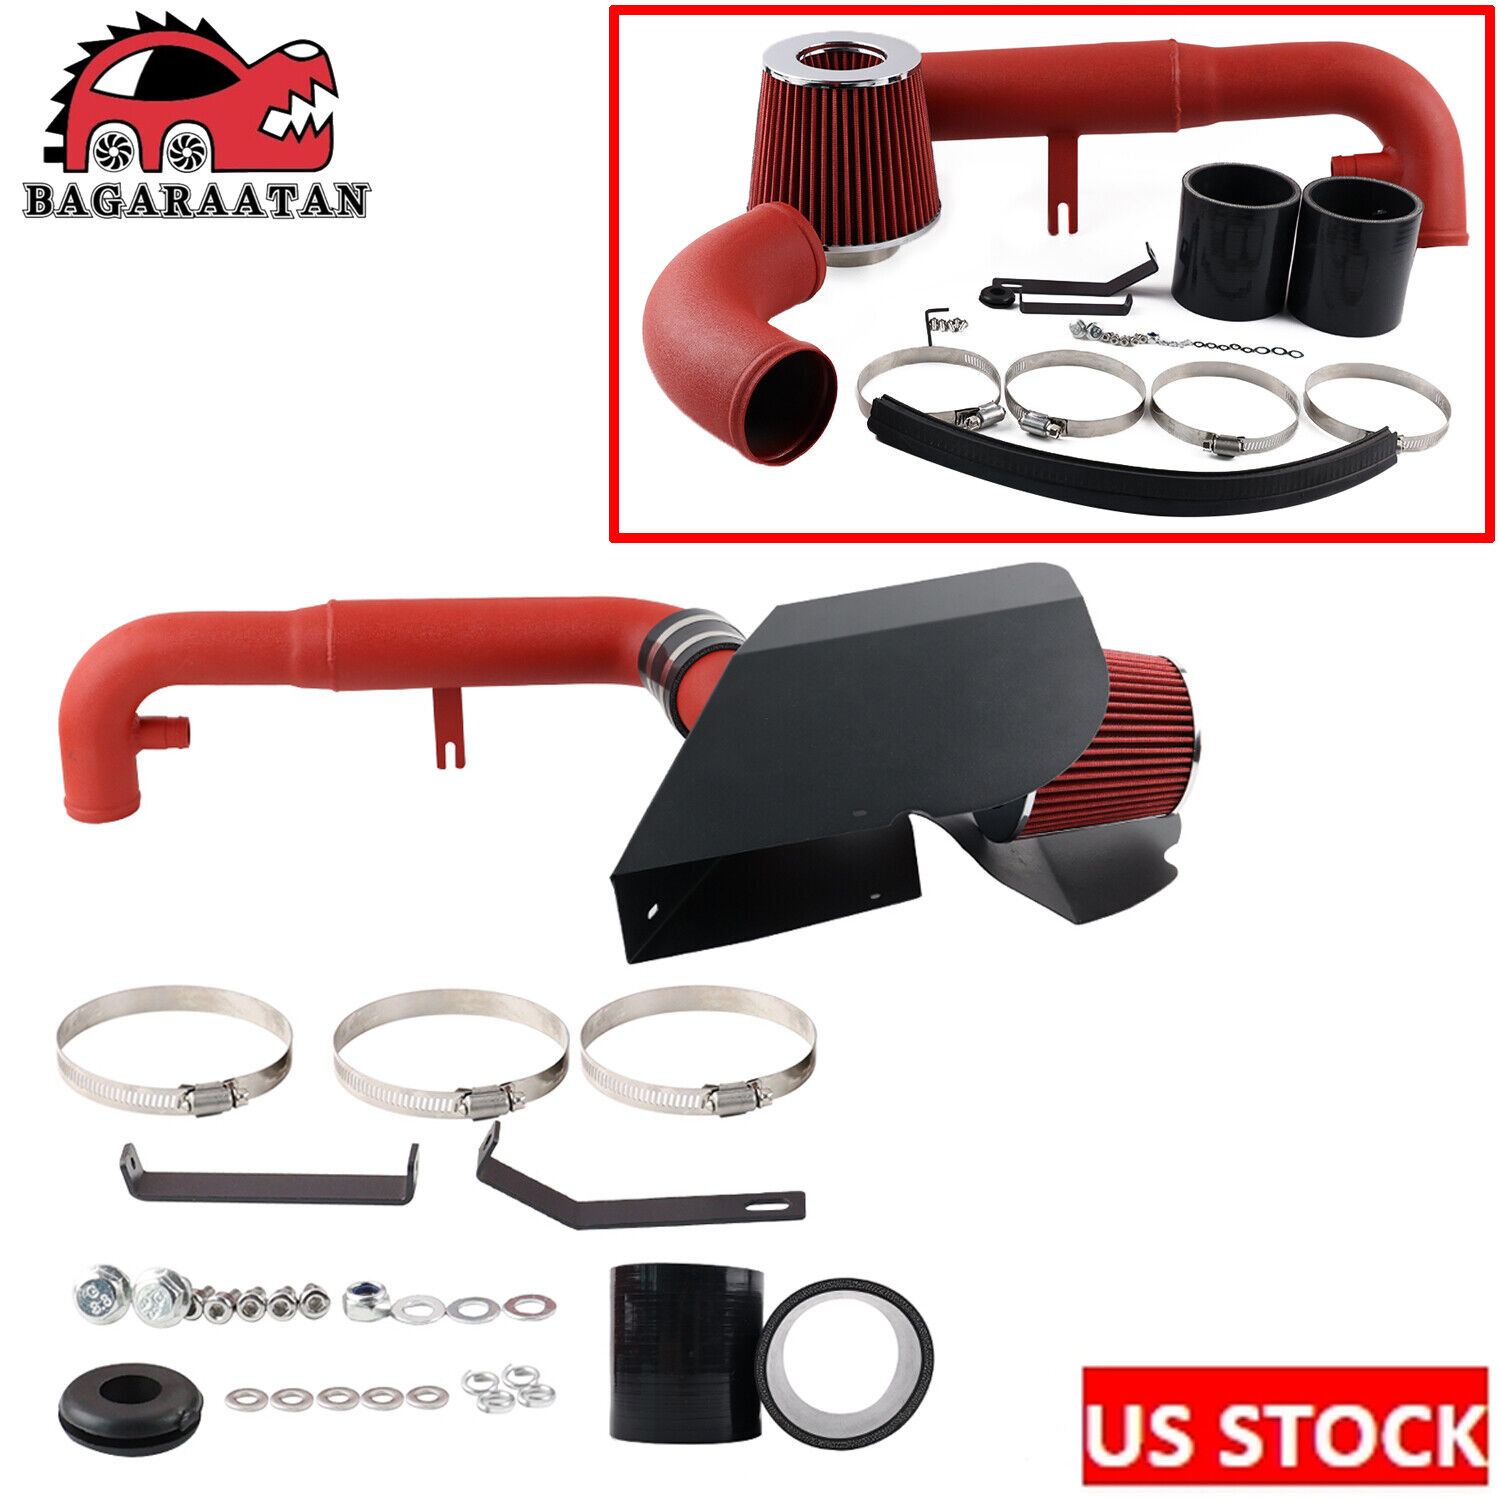 Red Cold Air Intake System Kit For Audi A3 VW Golf MK5 GTI 2.0 TFSI 11-12 EA113